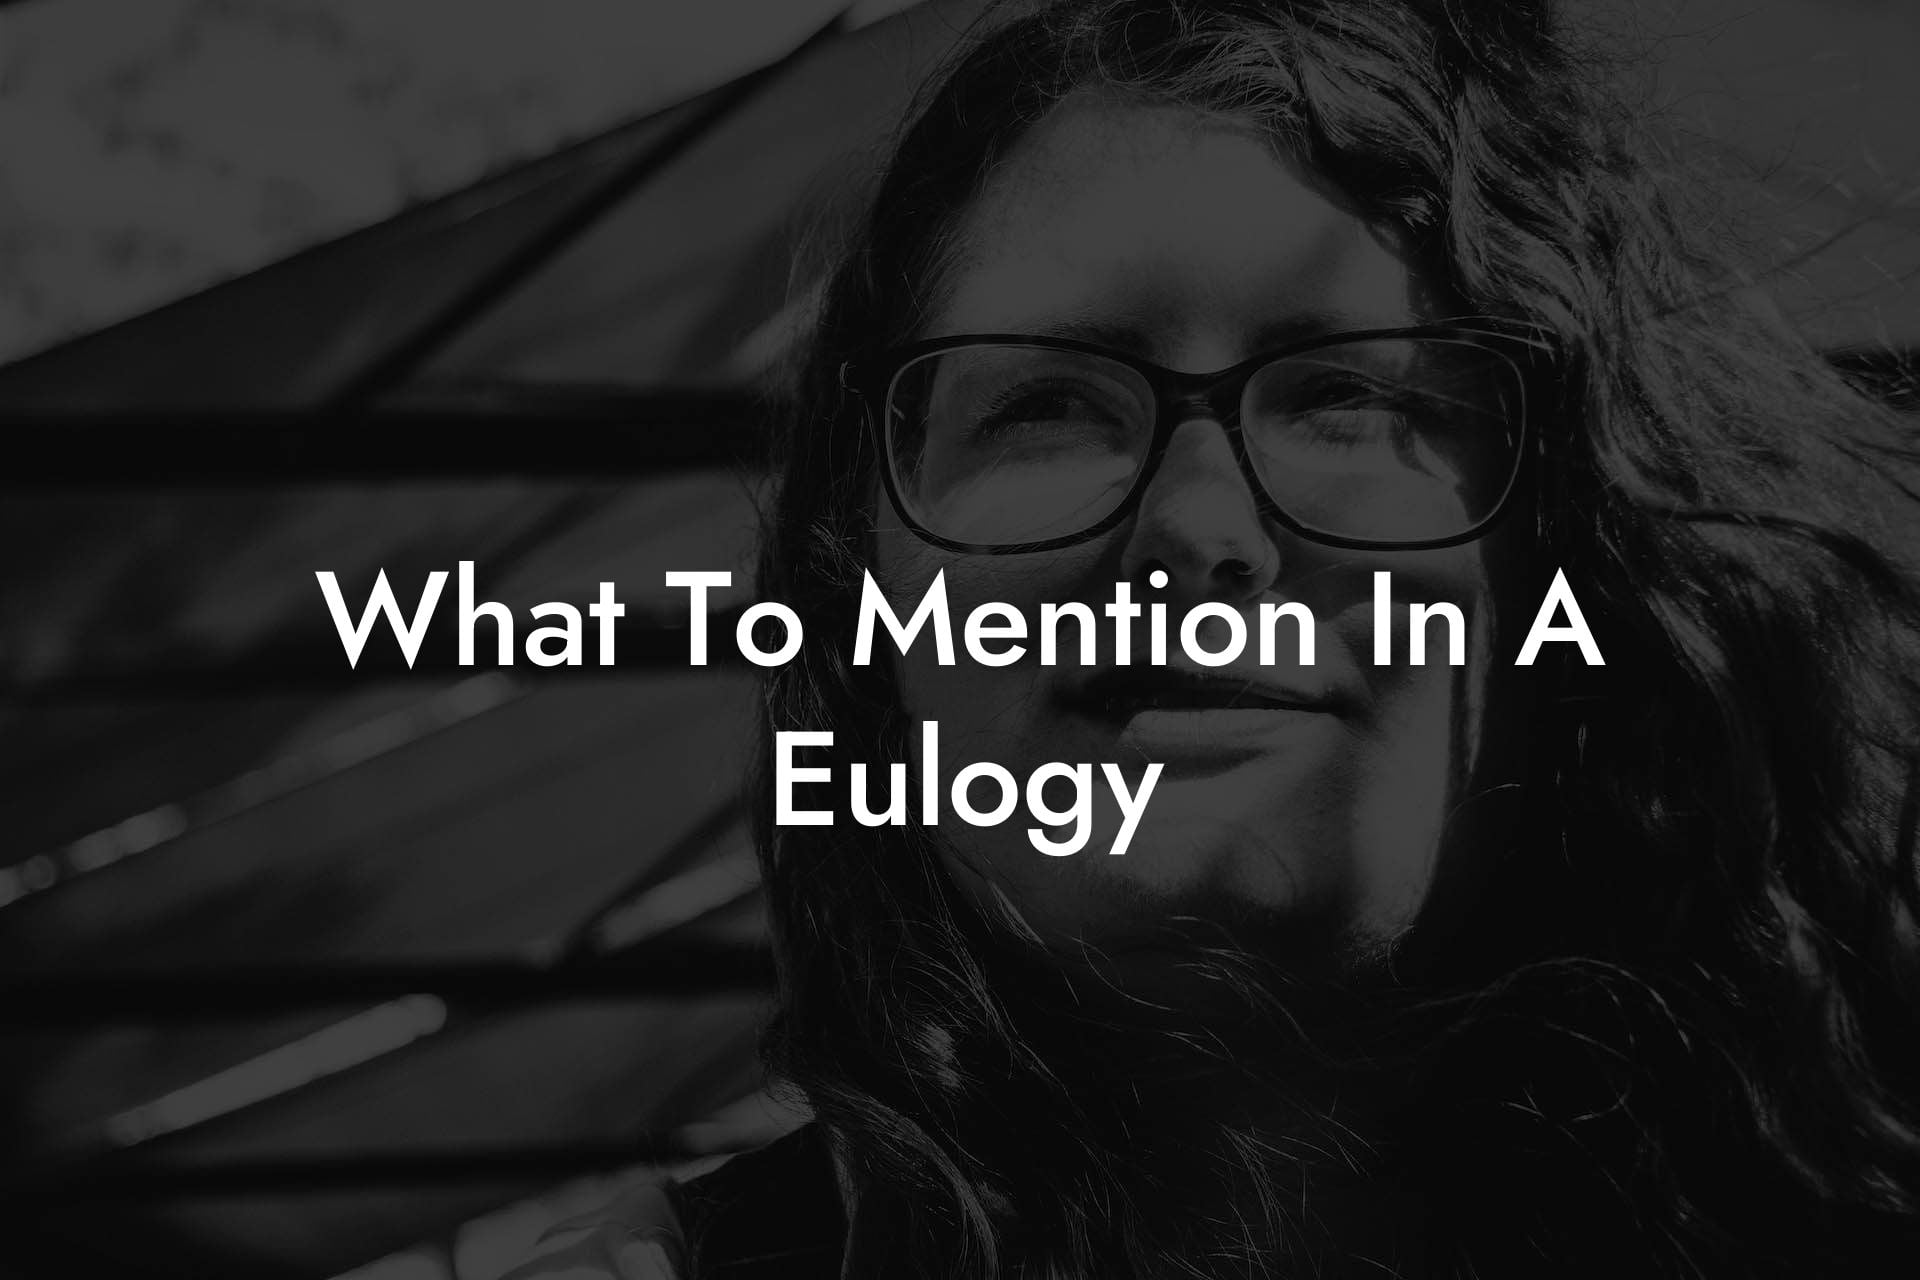 What To Mention In A Eulogy